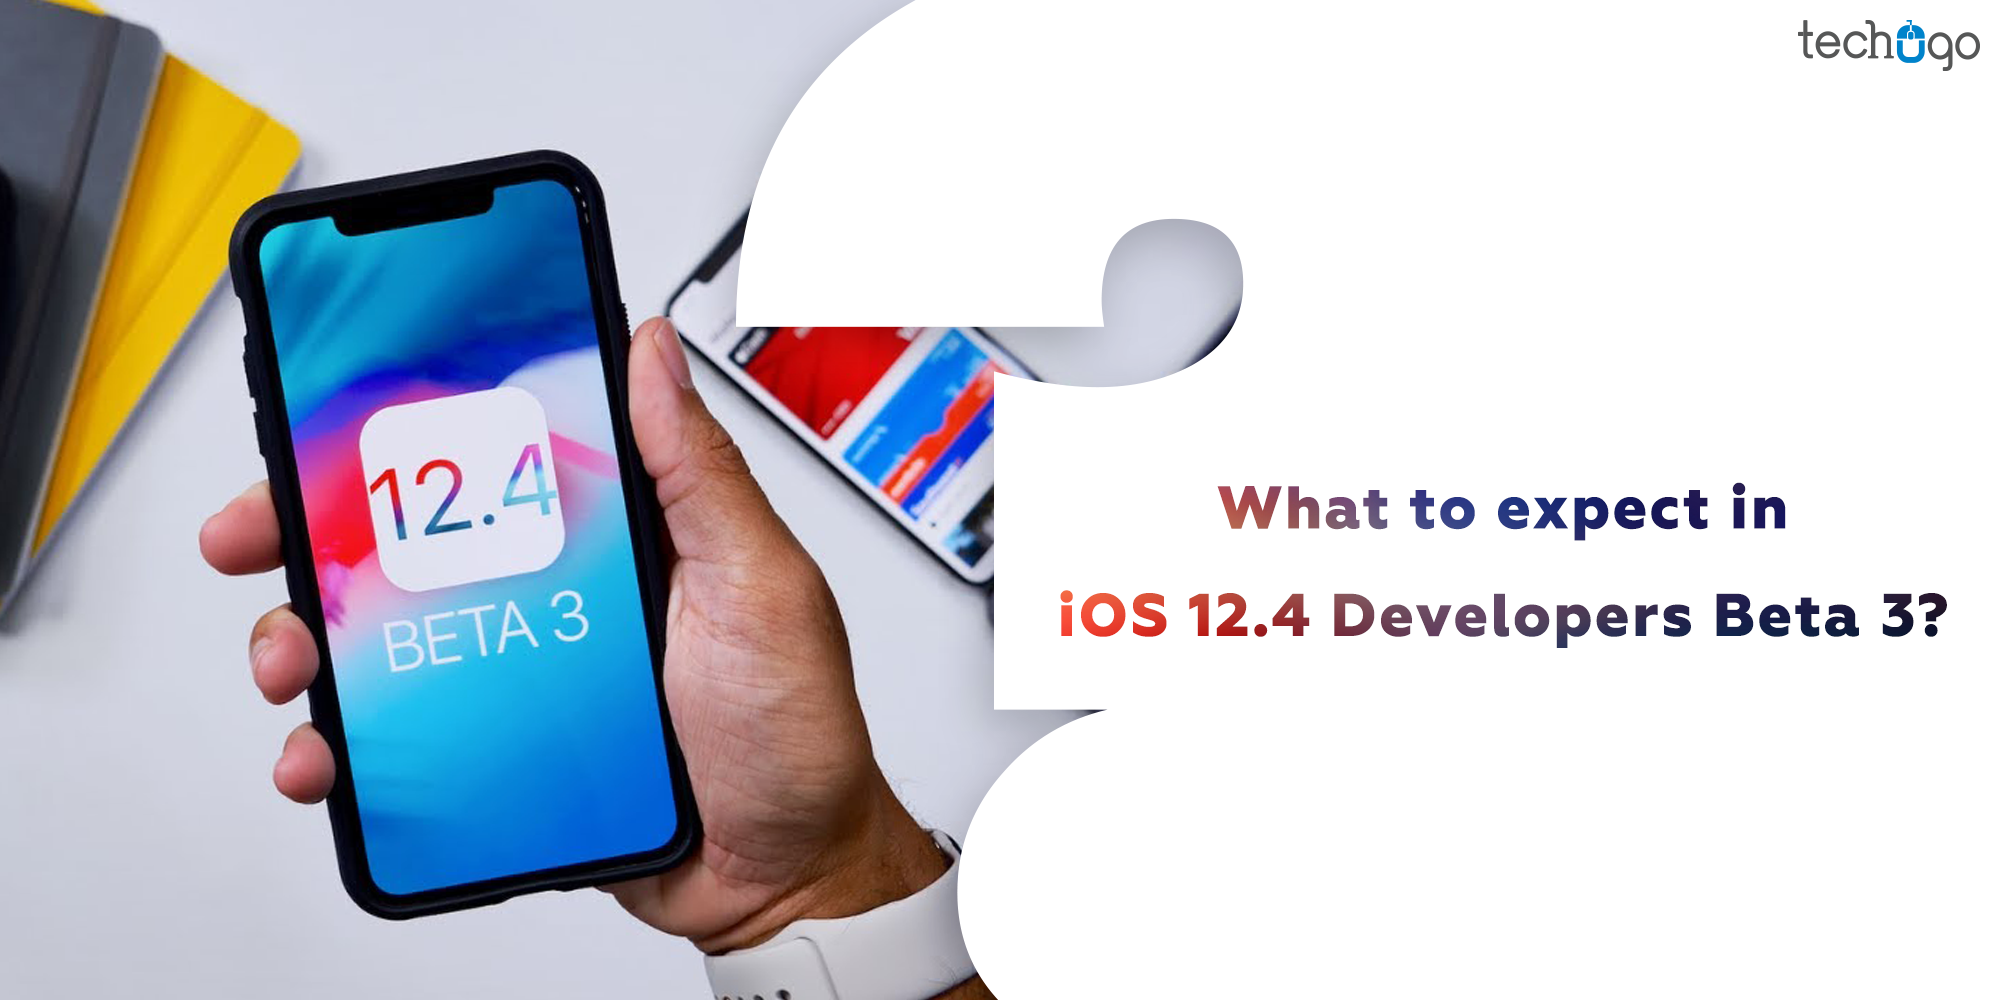 What To Expect In iOS 12.4 Developers Beta 3?